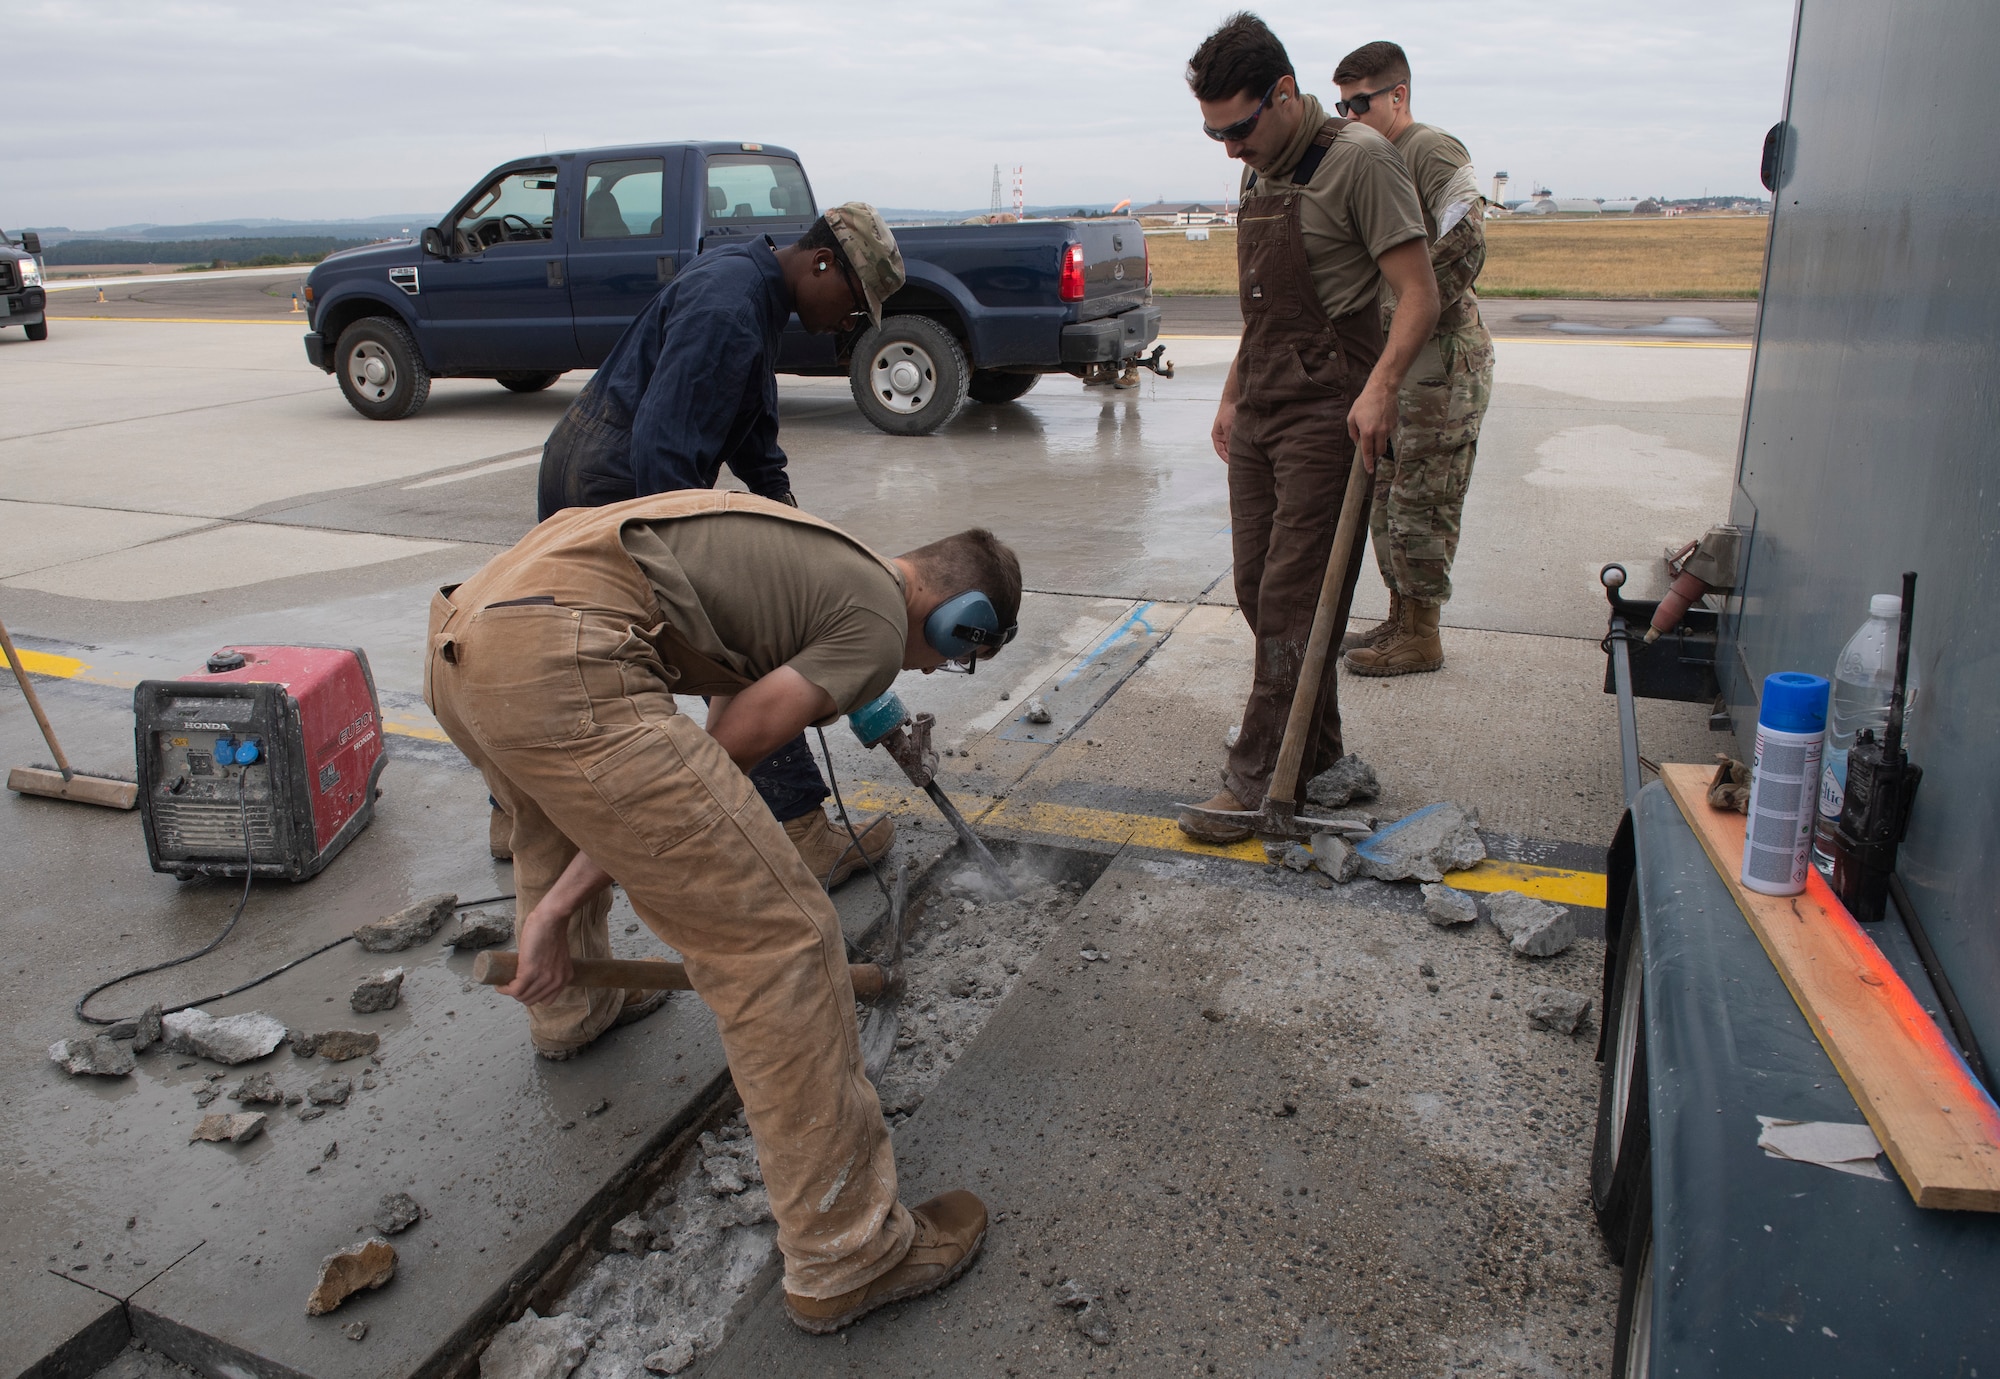 U.S. Air Force Airmen from the 52nd Civil Engineer Squadron pavements and construction equipment shop use a jackhammer on concrete at Spangdahlem Air Base, Germany, Sept. 10, 2020. The Dirt Boyz fixed two large cracks on the flightline which prevented obstructions caused by foreign object debris. (U.S. Air Force photo by Airman 1st Class Alison Stewart)